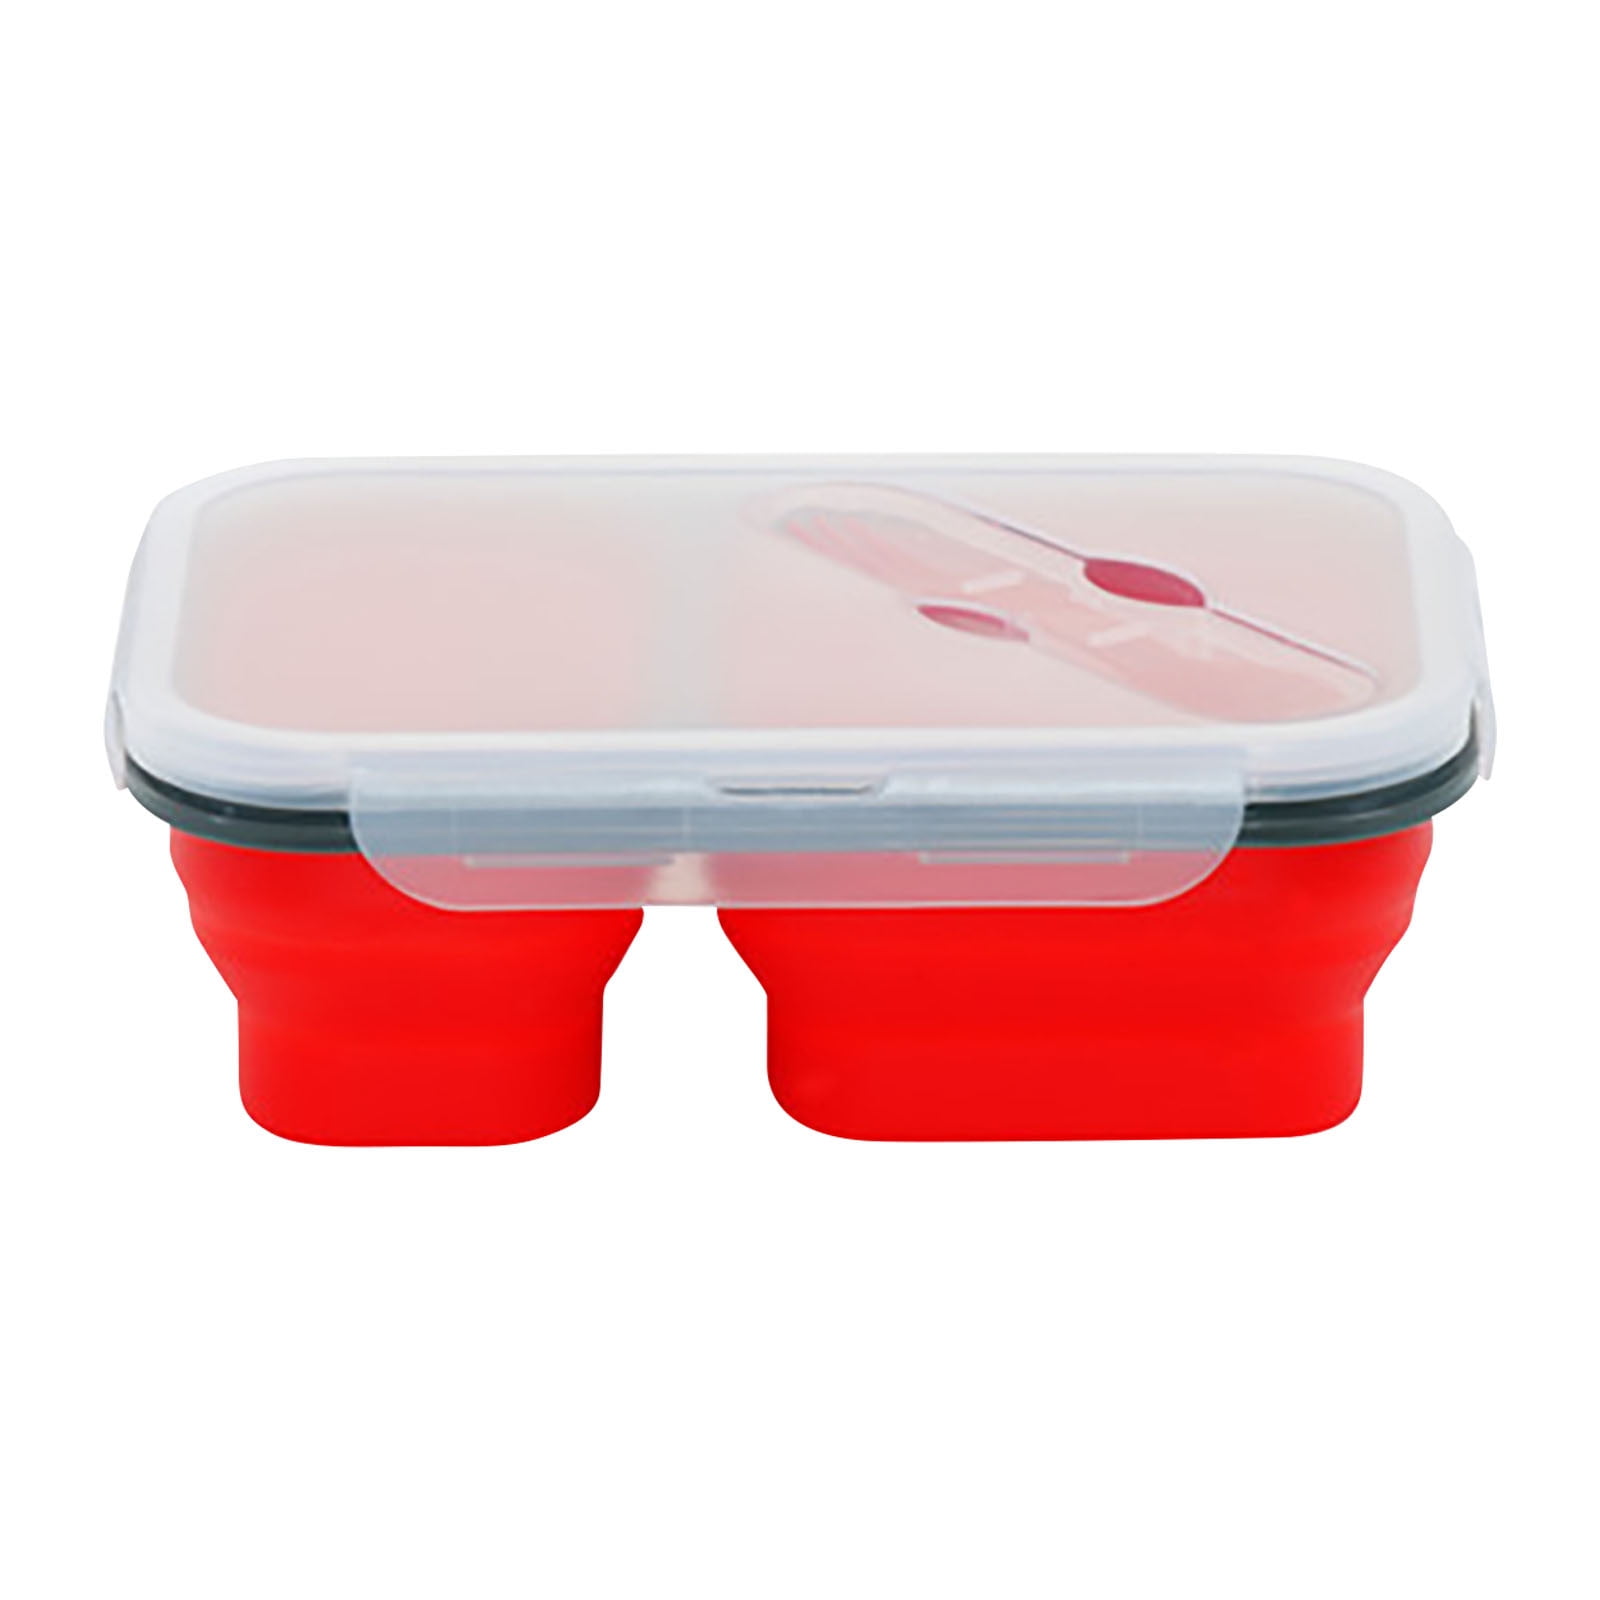 XMMSWDLA folding Bento Box, Lunch Box 2 Compartment, Premium Silicone, ,  Airtight Snap-Top Lid, Microwave and Dishwasher Safe,with Spoon